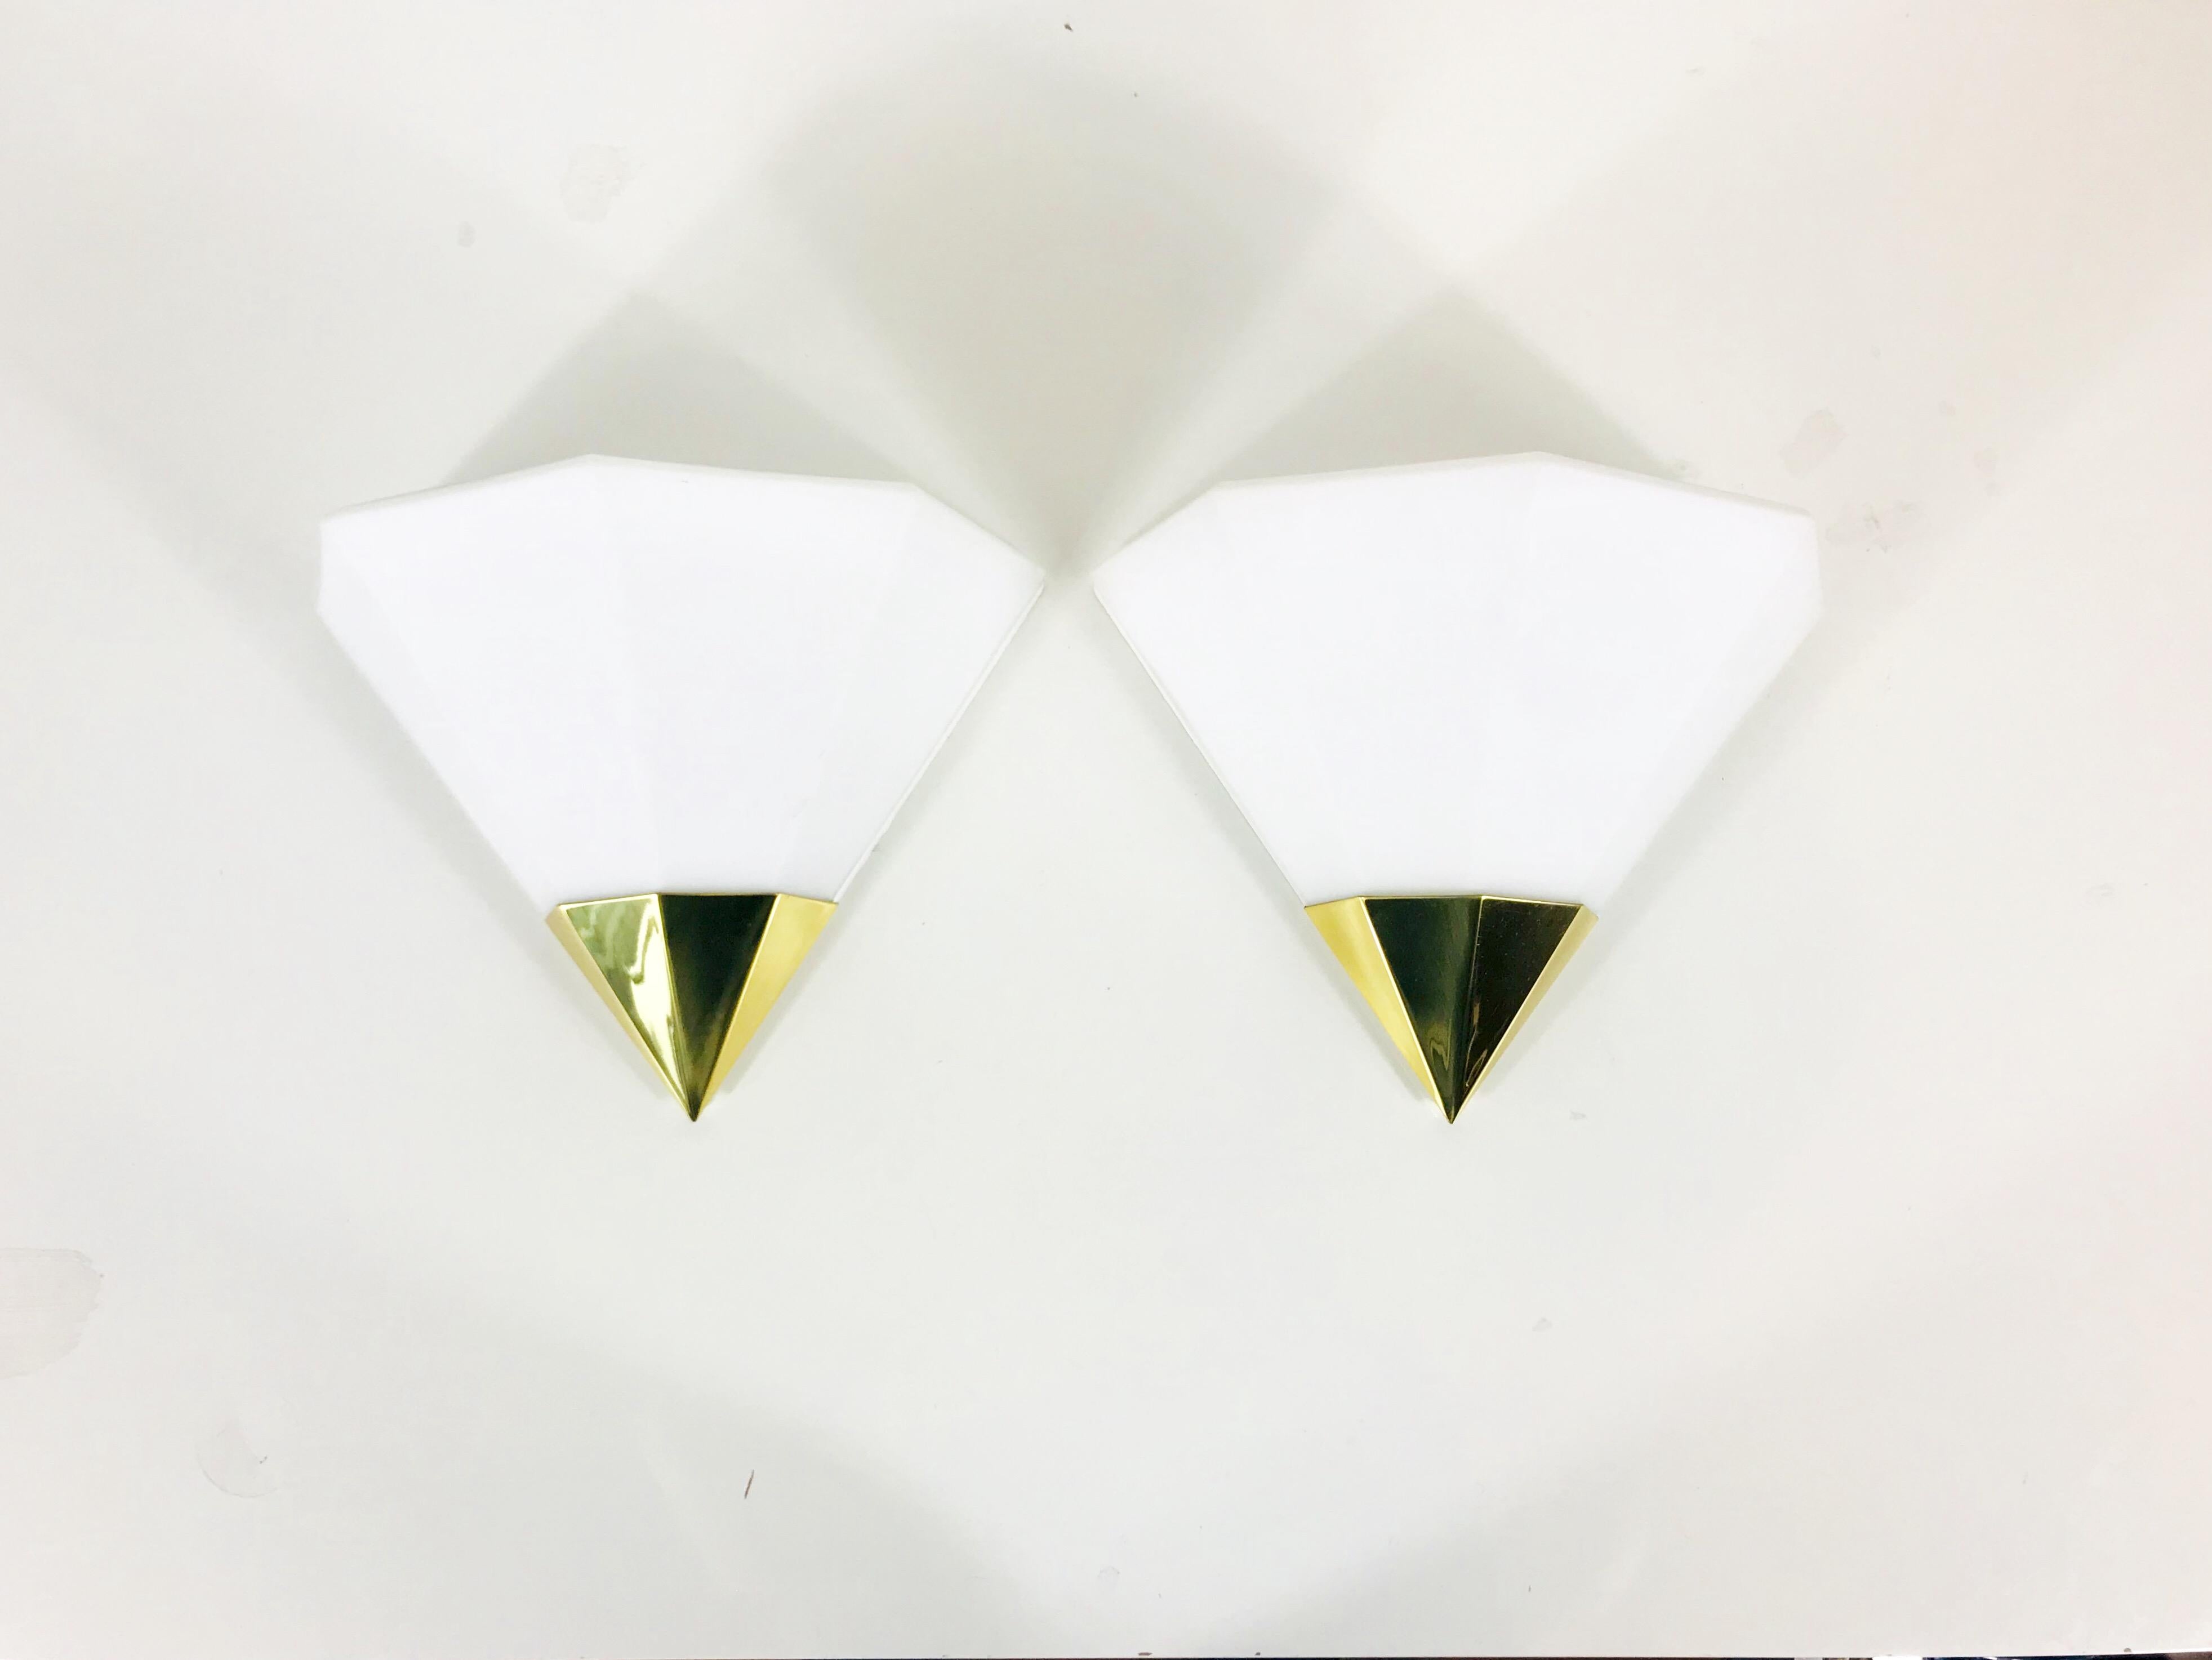 A beautiful pair of Mid-Century Modern wall lamps by Glashütte Limburg made in Germany in the 1970s. They have a beautiful triangle shape and are made of brass and opaline glass. The back is white metal.

The light requires one E14 light bulb.